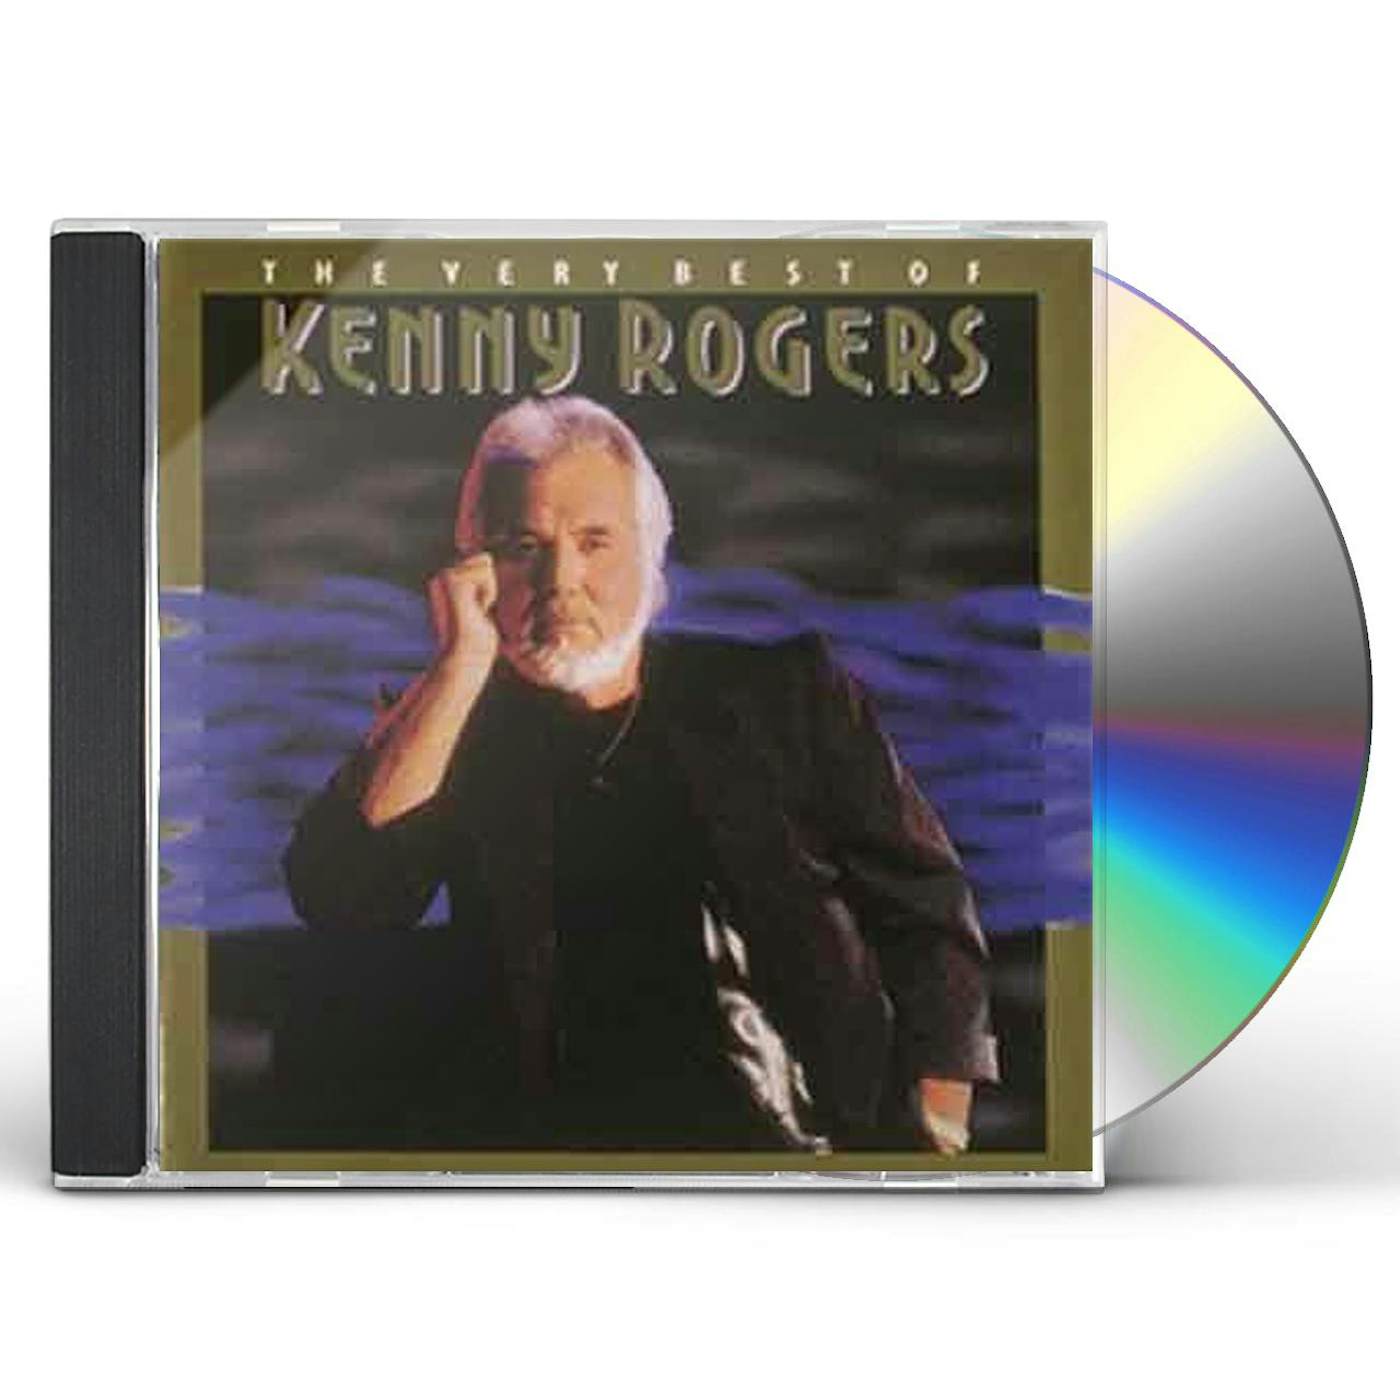 VERY BEST OF Kenny Rogers CD